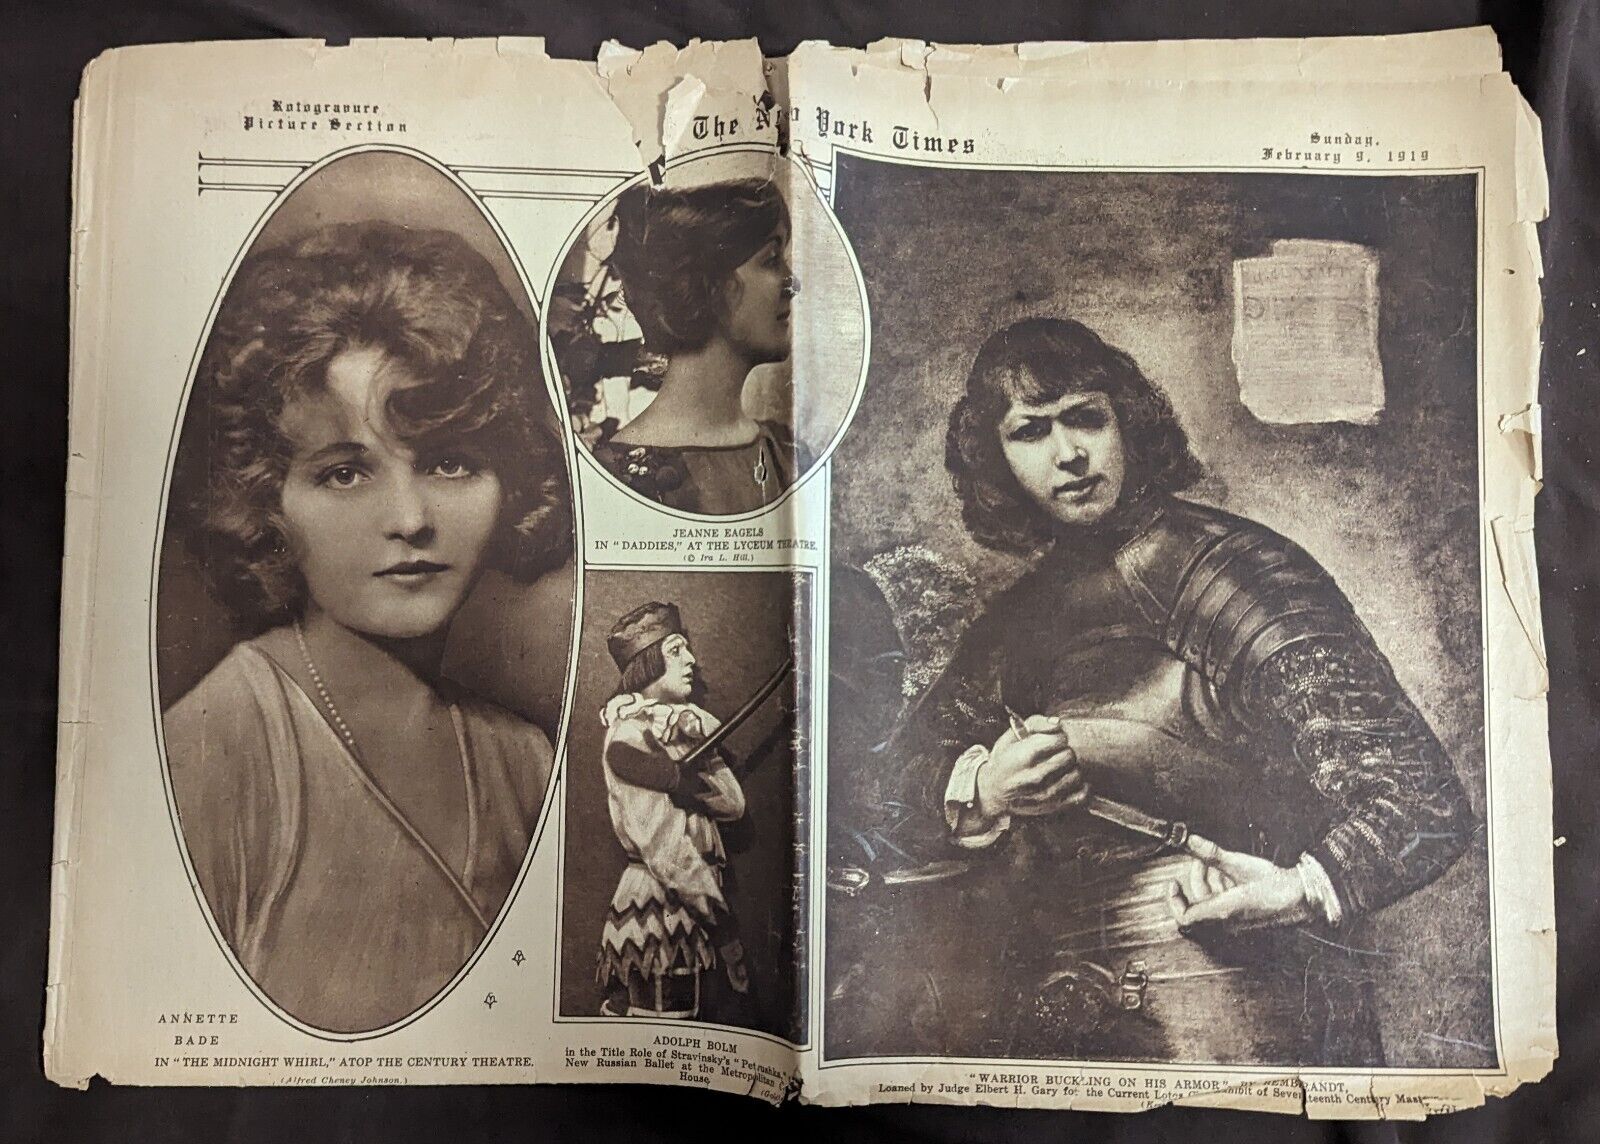 New York Times Feb 9 1919 Picture Section